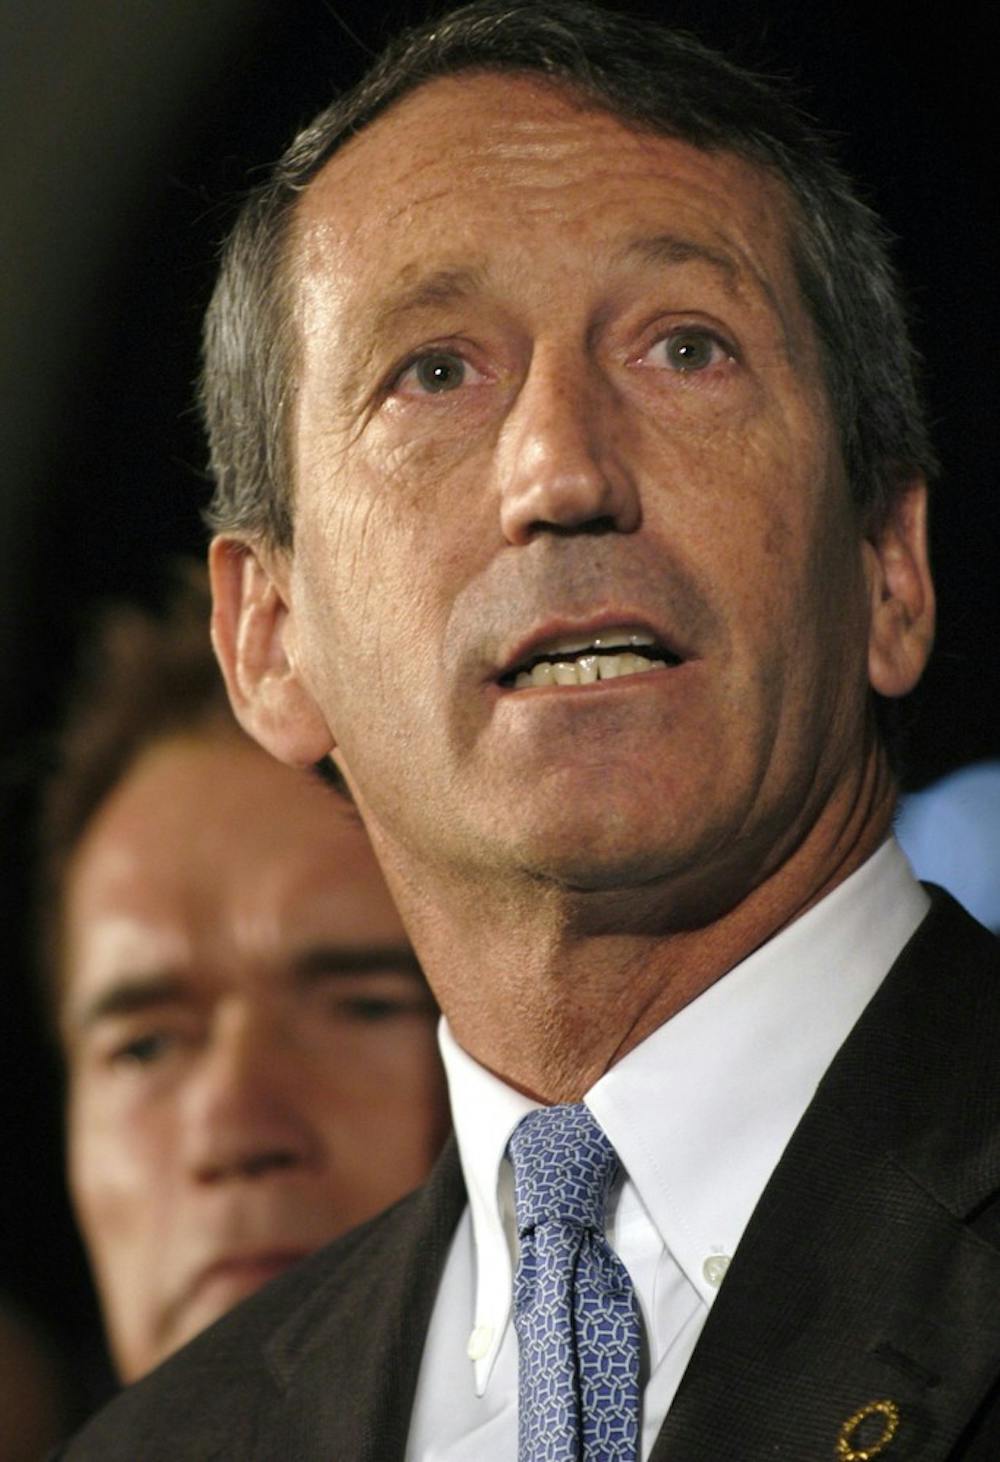 MARK SANFORD. He was supposed to be hiking on the Appalachian Trail, but the South Carolina governor was in Argentina seeing his mistress. He confessed to the affair in 2009, ran for Congress in May and won. (Tom Gralish/Philadelphia Inquirer/MCT)